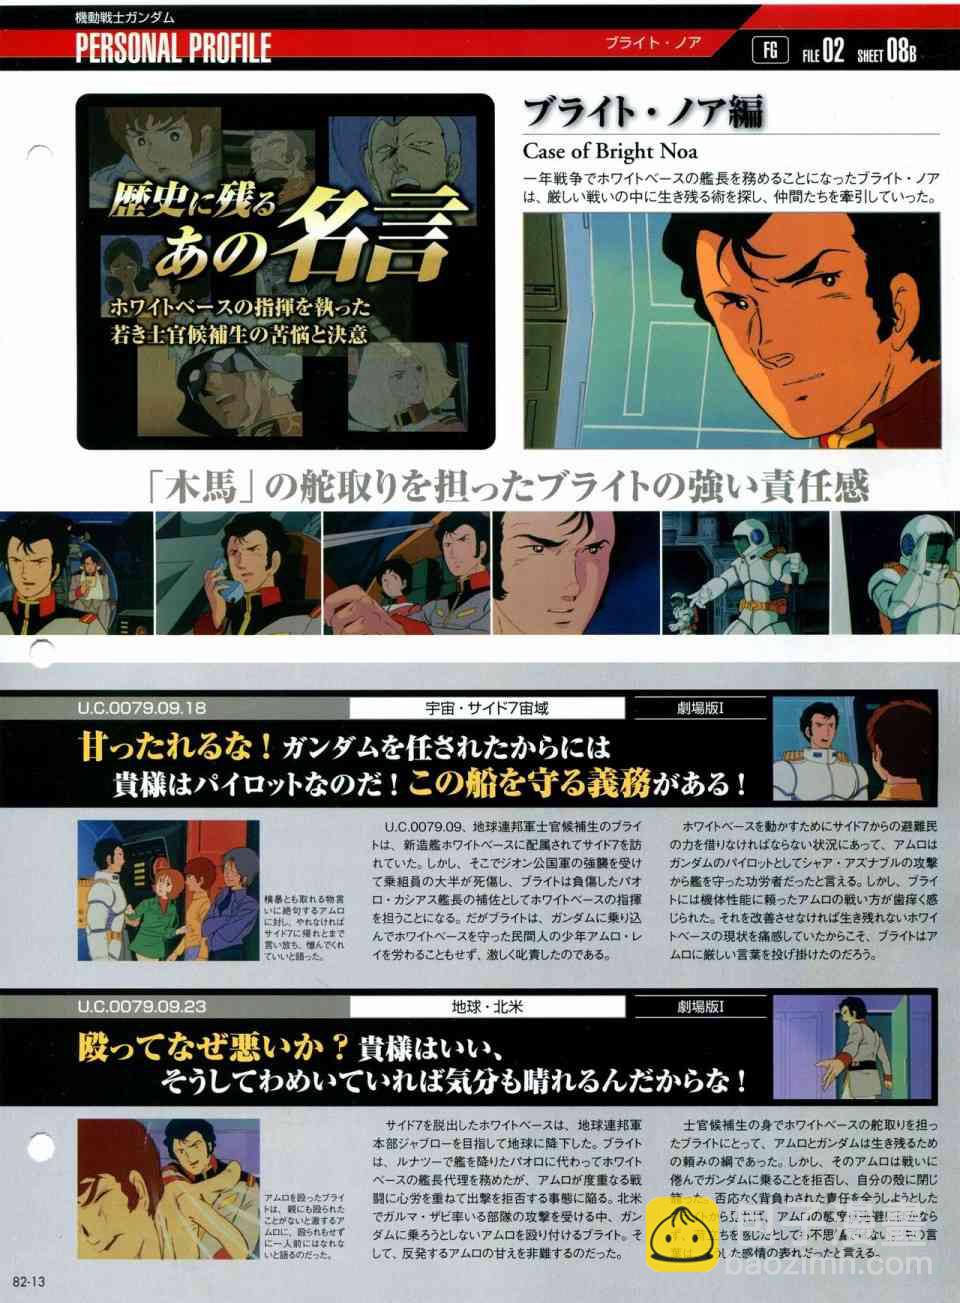 The Official Gundam Perfect File  - 第81-90話(1/7) - 1